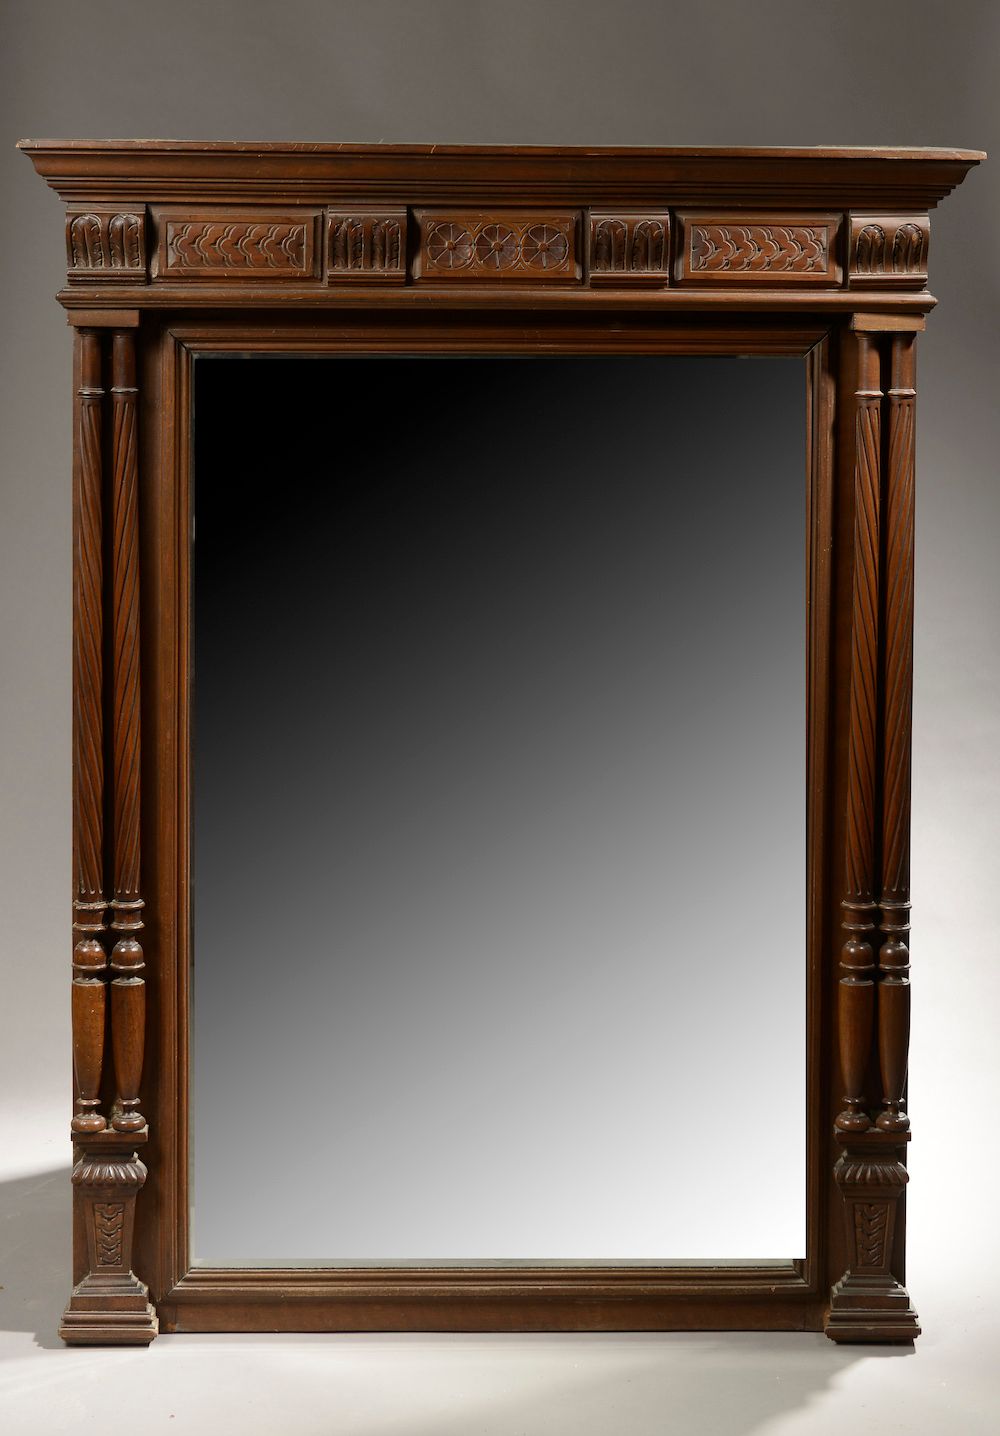 Null Rectangular mirror, the frame in stained wood with detached columns and lea&hellip;